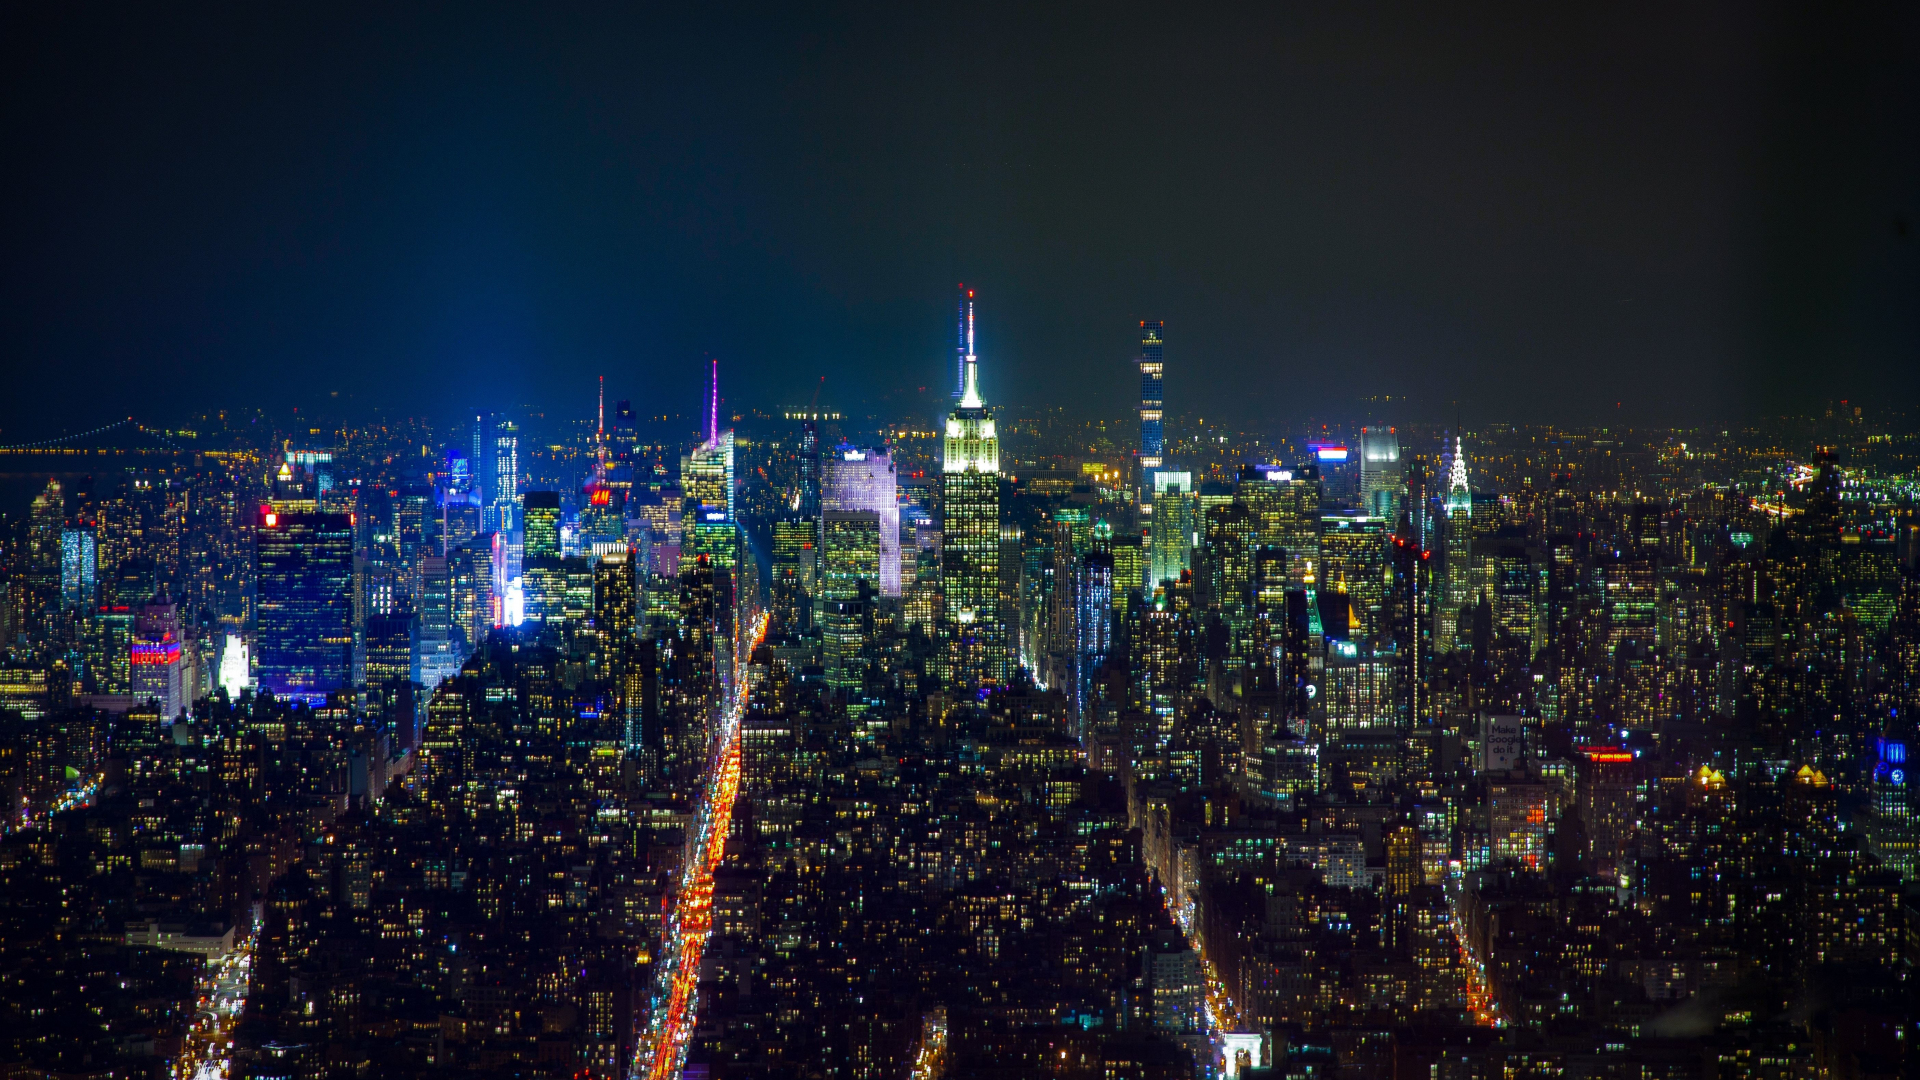 Download 1920x1080 Wallpaper New York Buildings At Night Cityscape